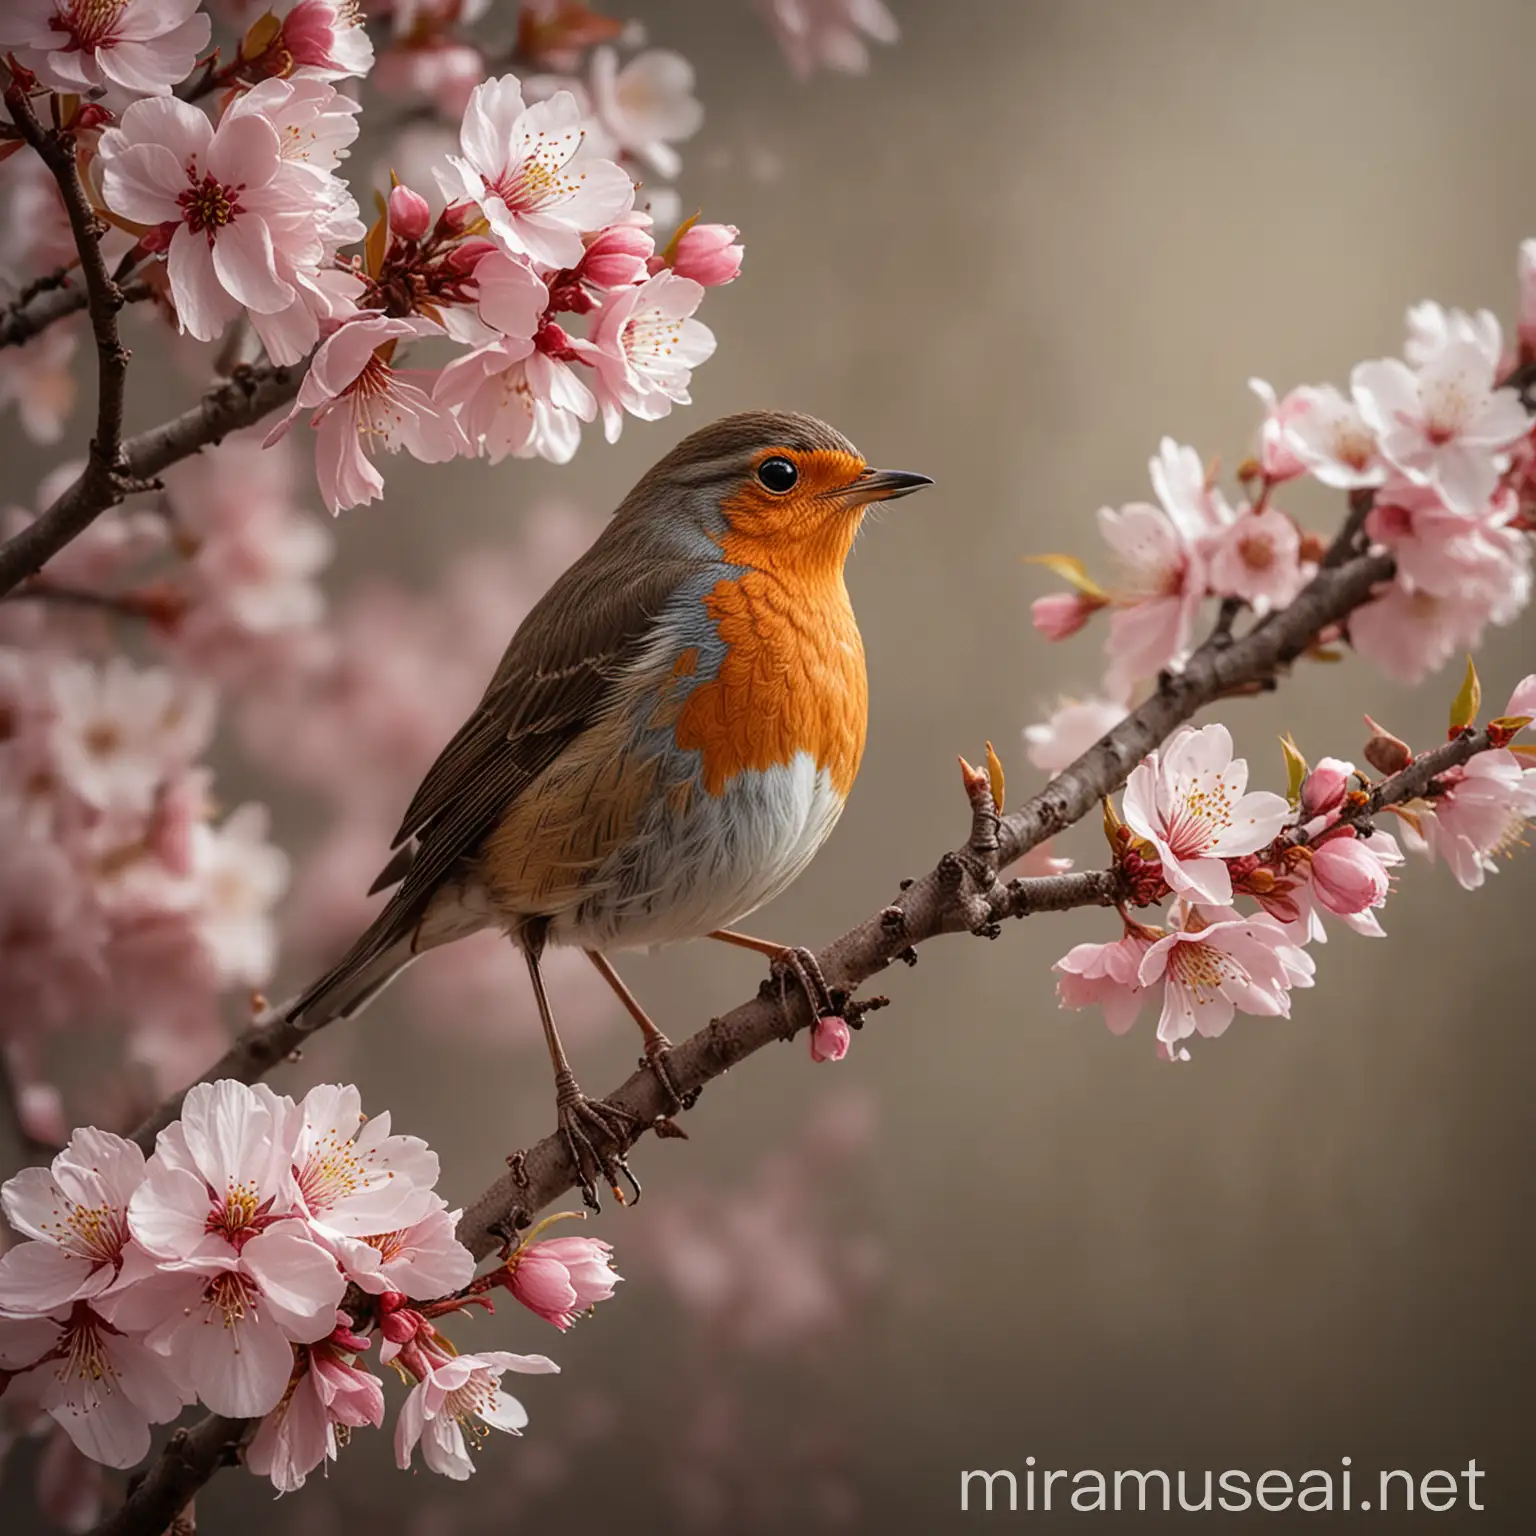 capturing the delicate beauty of a robin bird perched on a cherry blossom branch, the blush of the blossoms stealing the spotlight